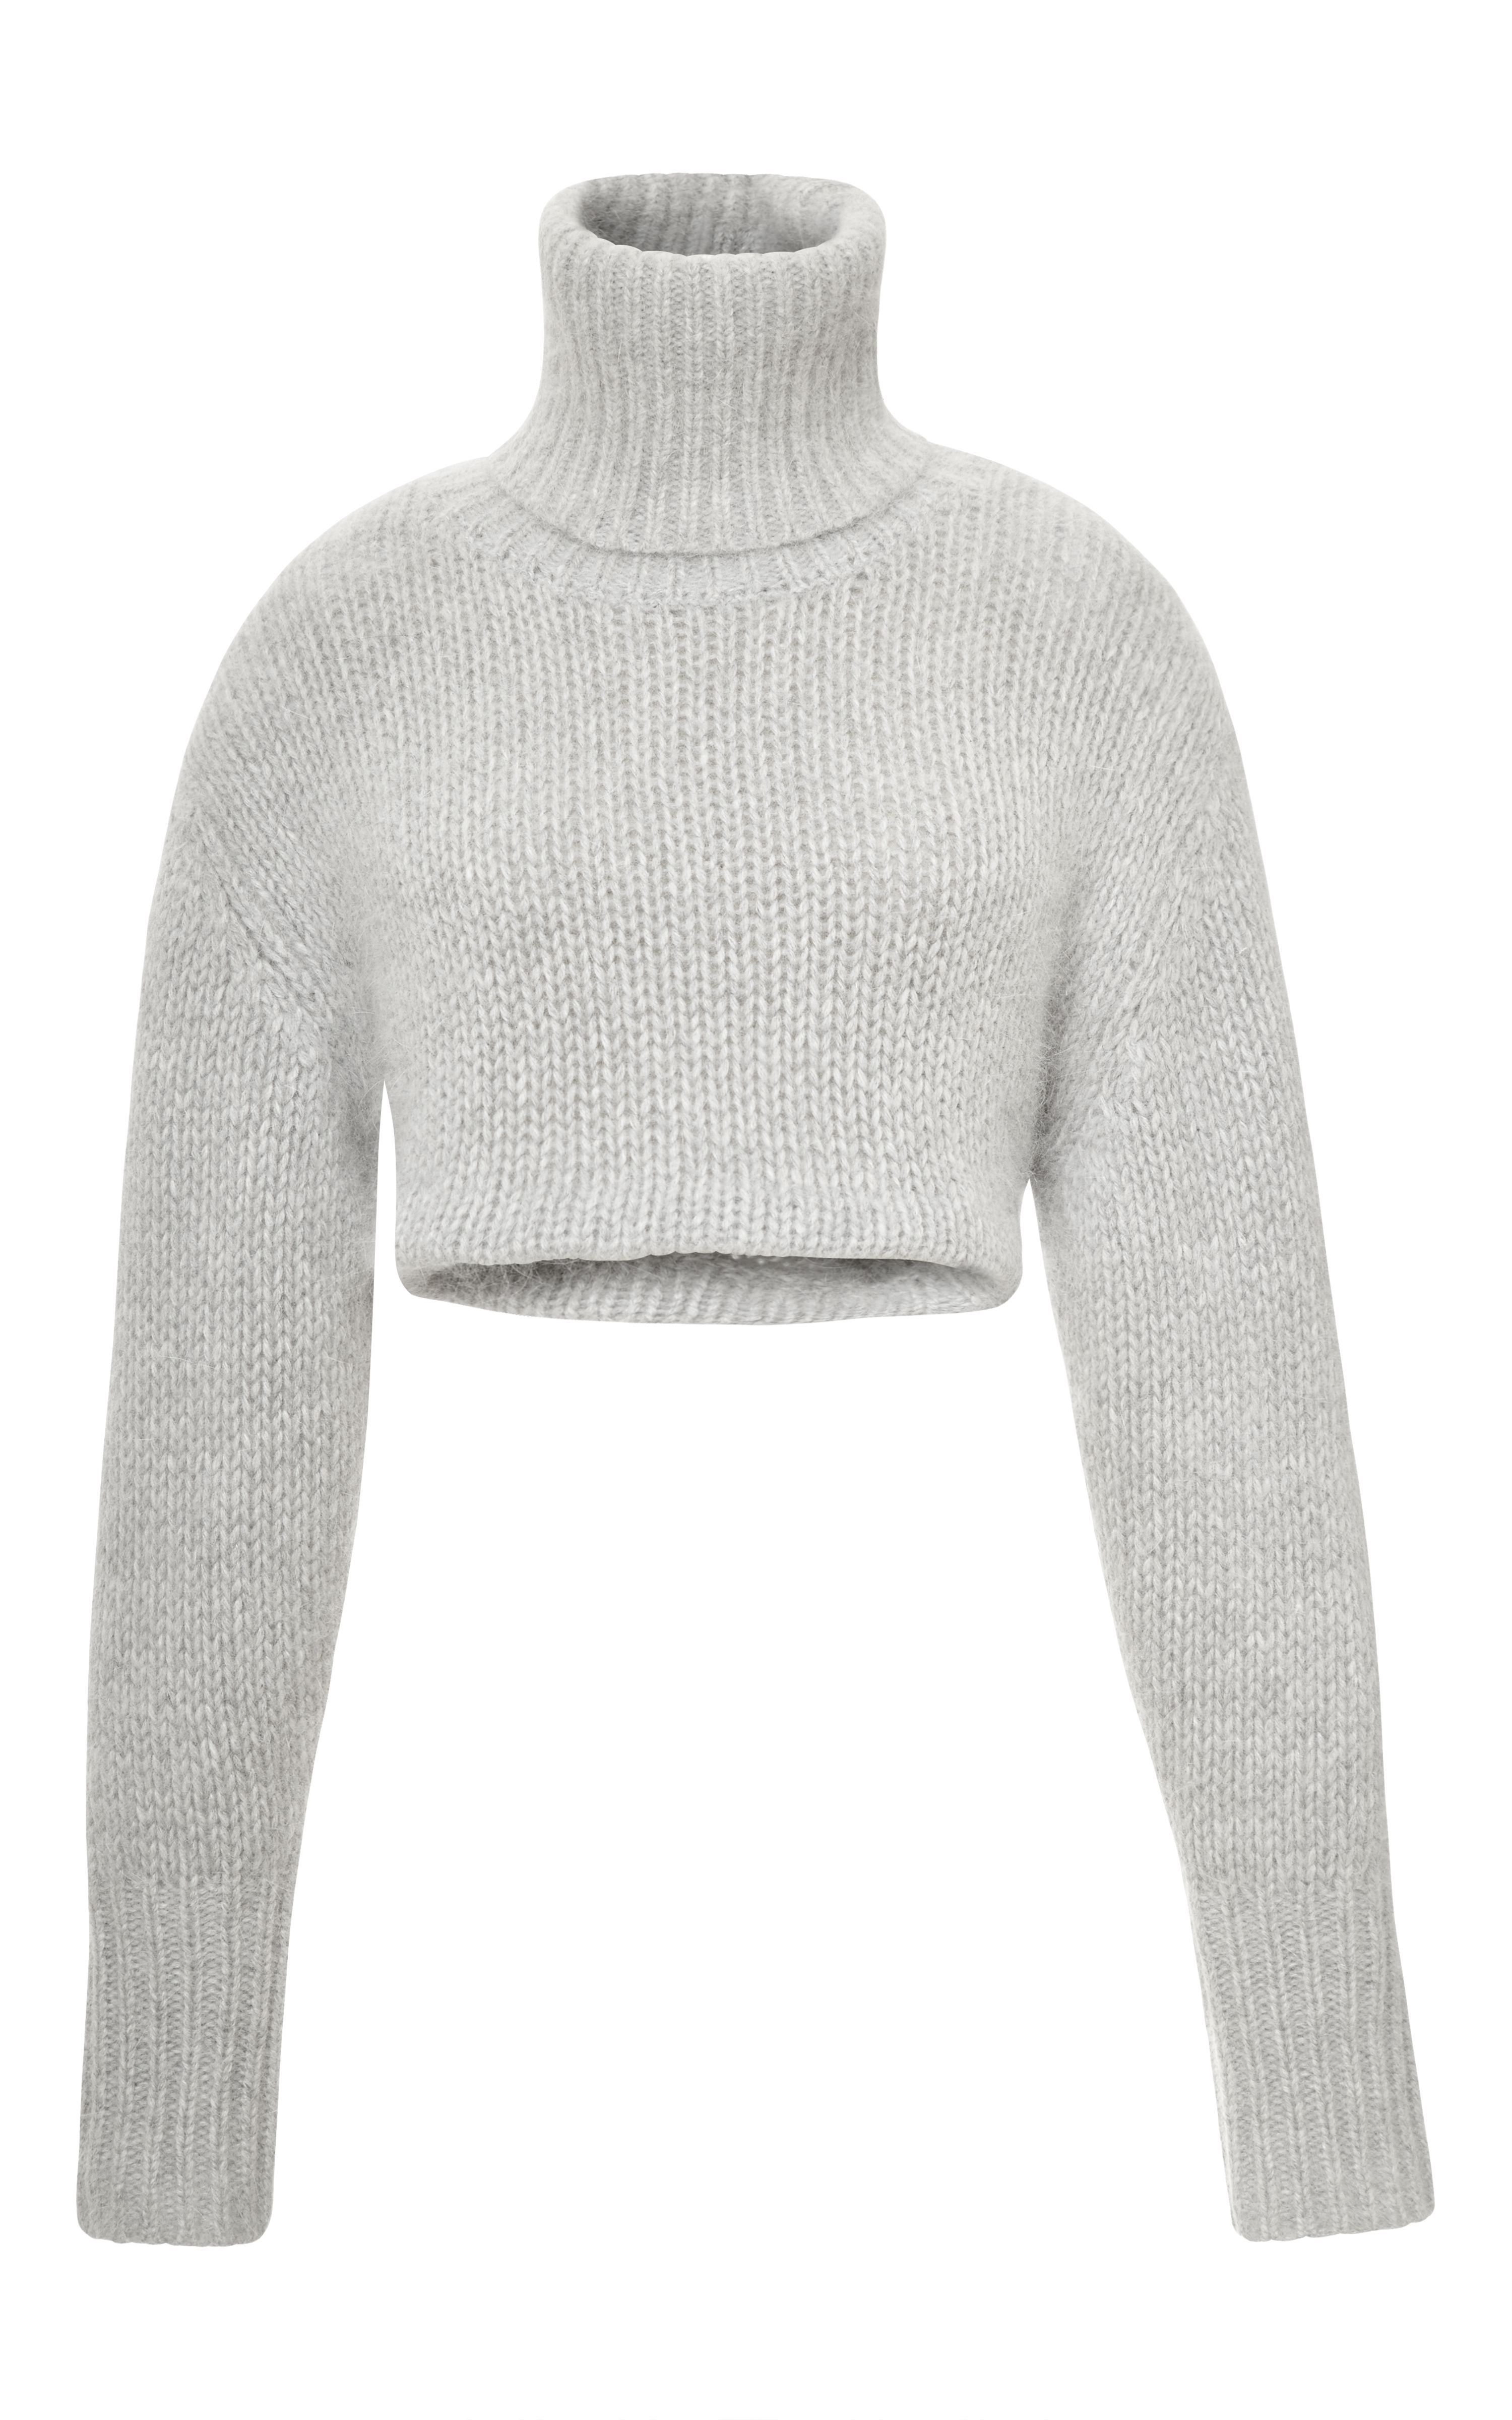 Lyst - Dion Lee Angora Knit Cropped Sweater in Gray